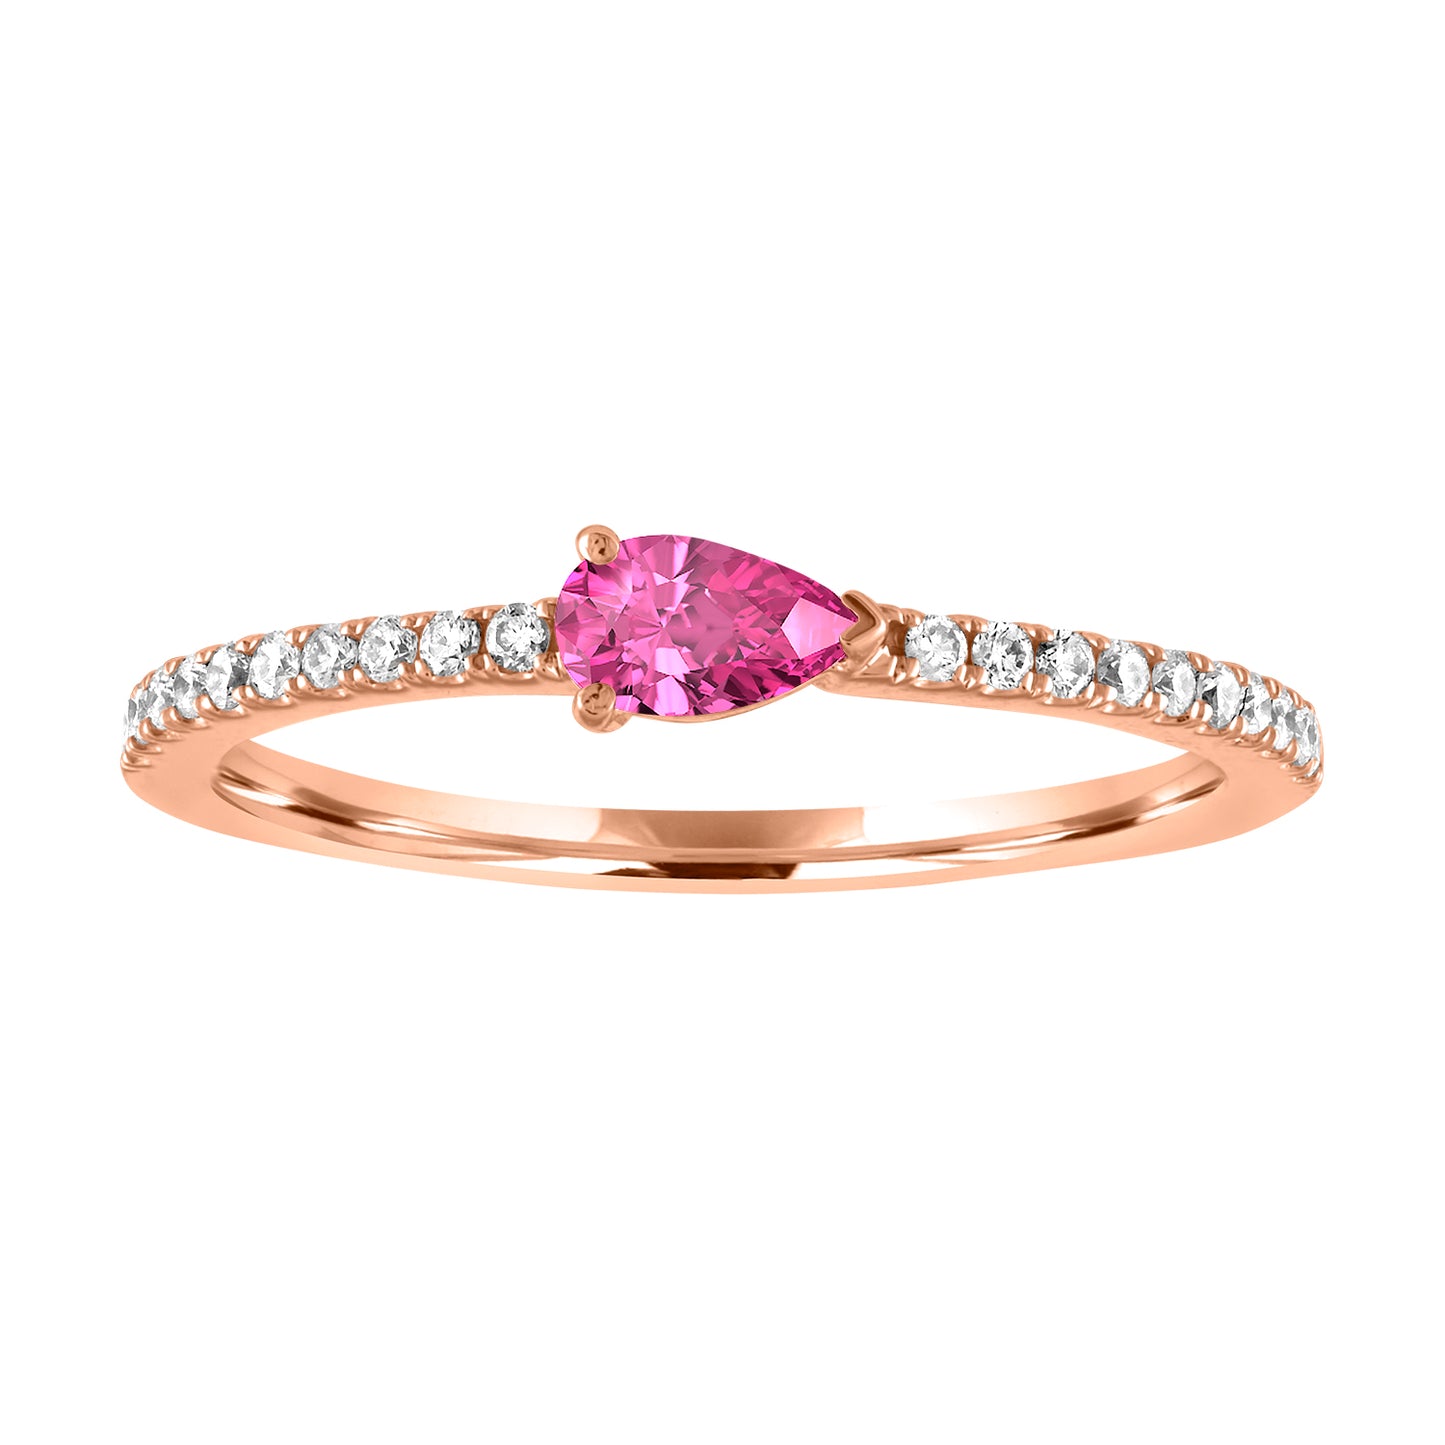 Rose gold skinny band with a pear shaped pink tourmaline in the center and round diamonds on the shank.